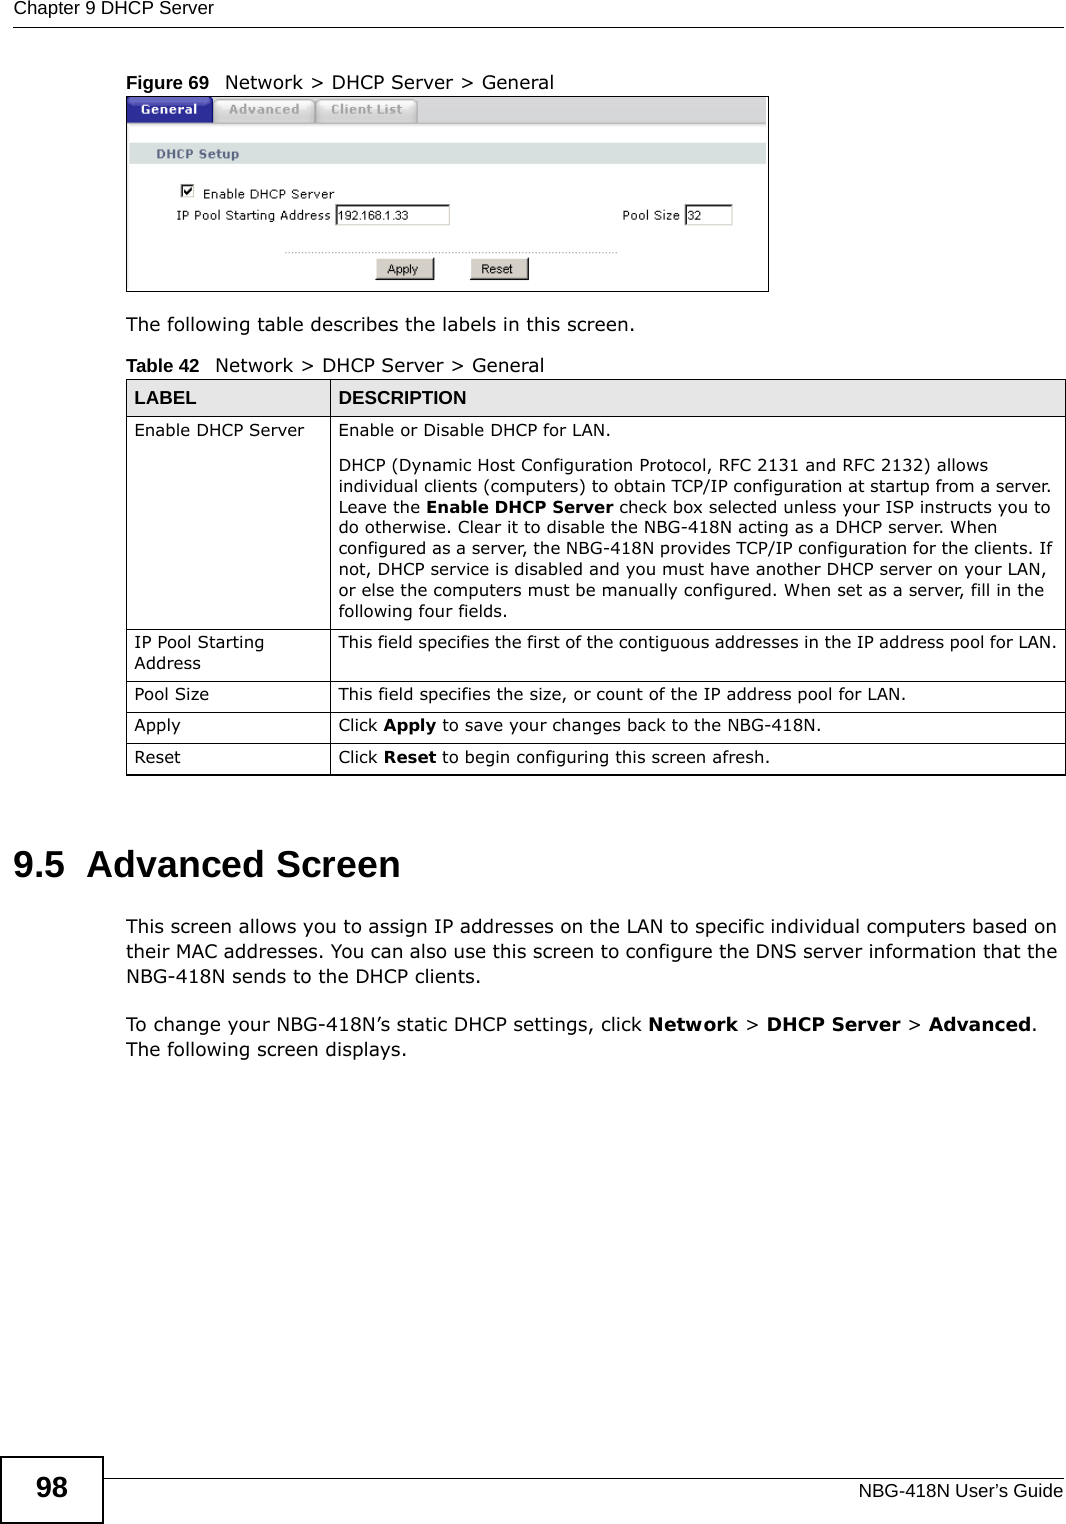 Chapter 9 DHCP ServerNBG-418N User’s Guide98Figure 69   Network &gt; DHCP Server &gt; General   The following table describes the labels in this screen.9.5  Advanced Screen    This screen allows you to assign IP addresses on the LAN to specific individual computers based on their MAC addresses. You can also use this screen to configure the DNS server information that the NBG-418N sends to the DHCP clients.To change your NBG-418N’s static DHCP settings, click Network &gt; DHCP Server &gt; Advanced. The following screen displays.Table 42   Network &gt; DHCP Server &gt; GeneralLABEL DESCRIPTIONEnable DHCP Server Enable or Disable DHCP for LAN.DHCP (Dynamic Host Configuration Protocol, RFC 2131 and RFC 2132) allows individual clients (computers) to obtain TCP/IP configuration at startup from a server. Leave the Enable DHCP Server check box selected unless your ISP instructs you to do otherwise. Clear it to disable the NBG-418N acting as a DHCP server. When configured as a server, the NBG-418N provides TCP/IP configuration for the clients. If not, DHCP service is disabled and you must have another DHCP server on your LAN, or else the computers must be manually configured. When set as a server, fill in the following four fields.IP Pool Starting AddressThis field specifies the first of the contiguous addresses in the IP address pool for LAN.Pool Size This field specifies the size, or count of the IP address pool for LAN.Apply Click Apply to save your changes back to the NBG-418N.Reset Click Reset to begin configuring this screen afresh.